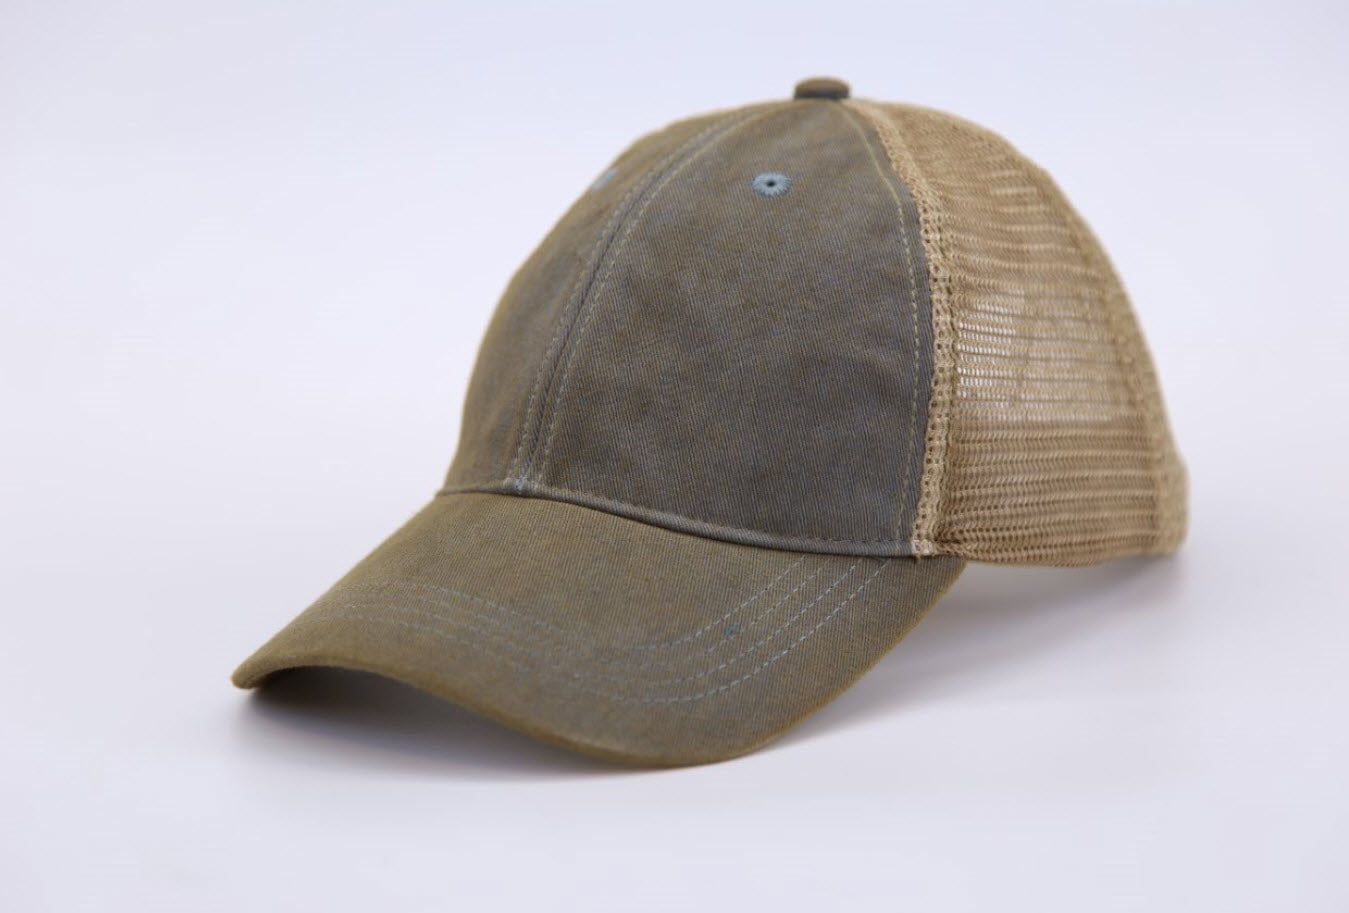 Overdye Vintage Distressed Hat With Fabric Strap Closure - ODMC ( 4 Colors )